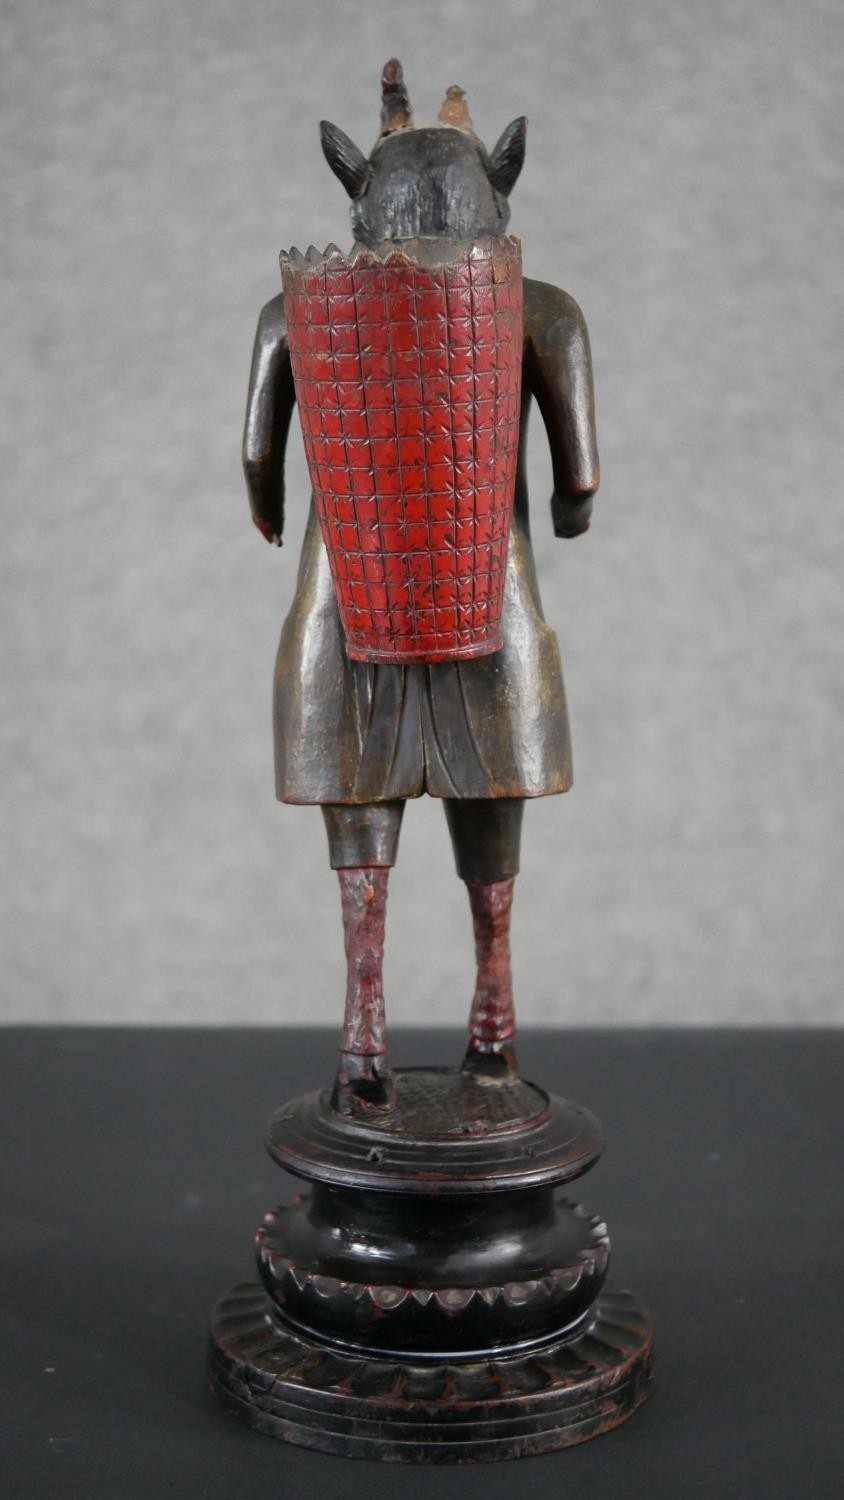 A 19th century carved black forest faun match holder, a pedestal base with red basket on his back. - Image 4 of 6